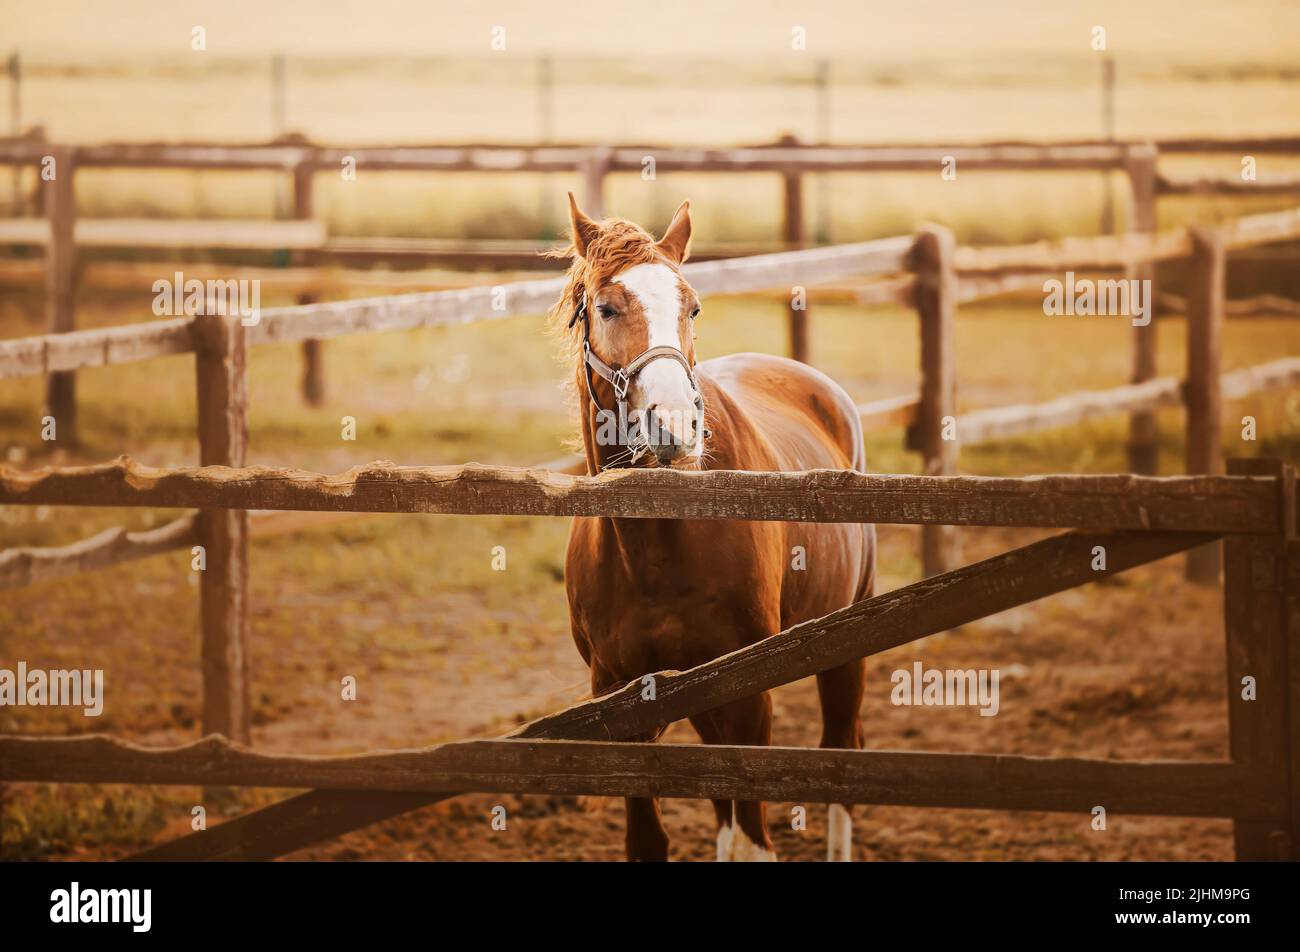 A beautiful sorrel horse stands in a paddock with a wooden fence on a farm located in the fields on a summer day. Agriculture and livestock. Stock Photo